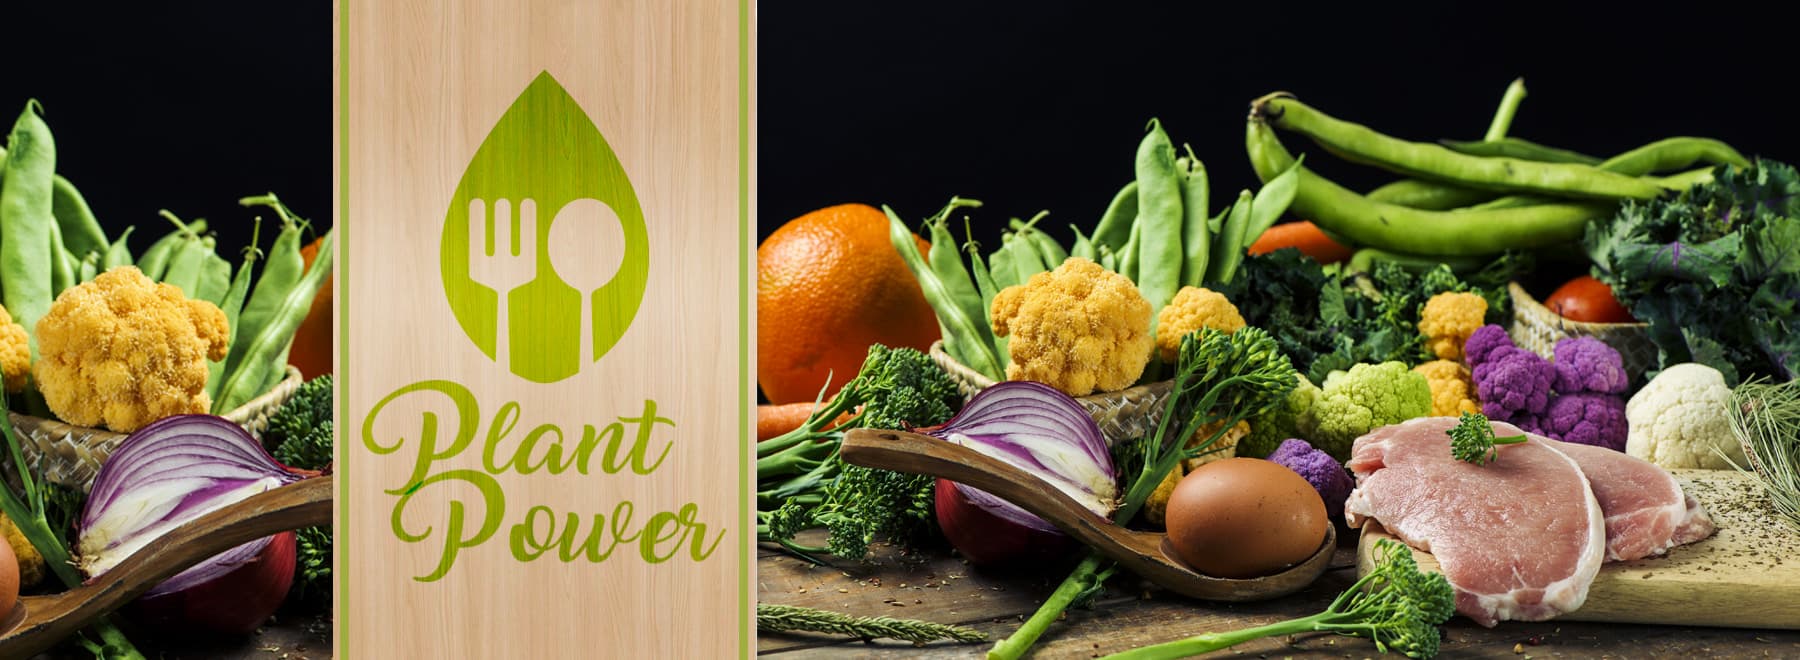 Top image graphic for plant power story - image focuses on foods for 